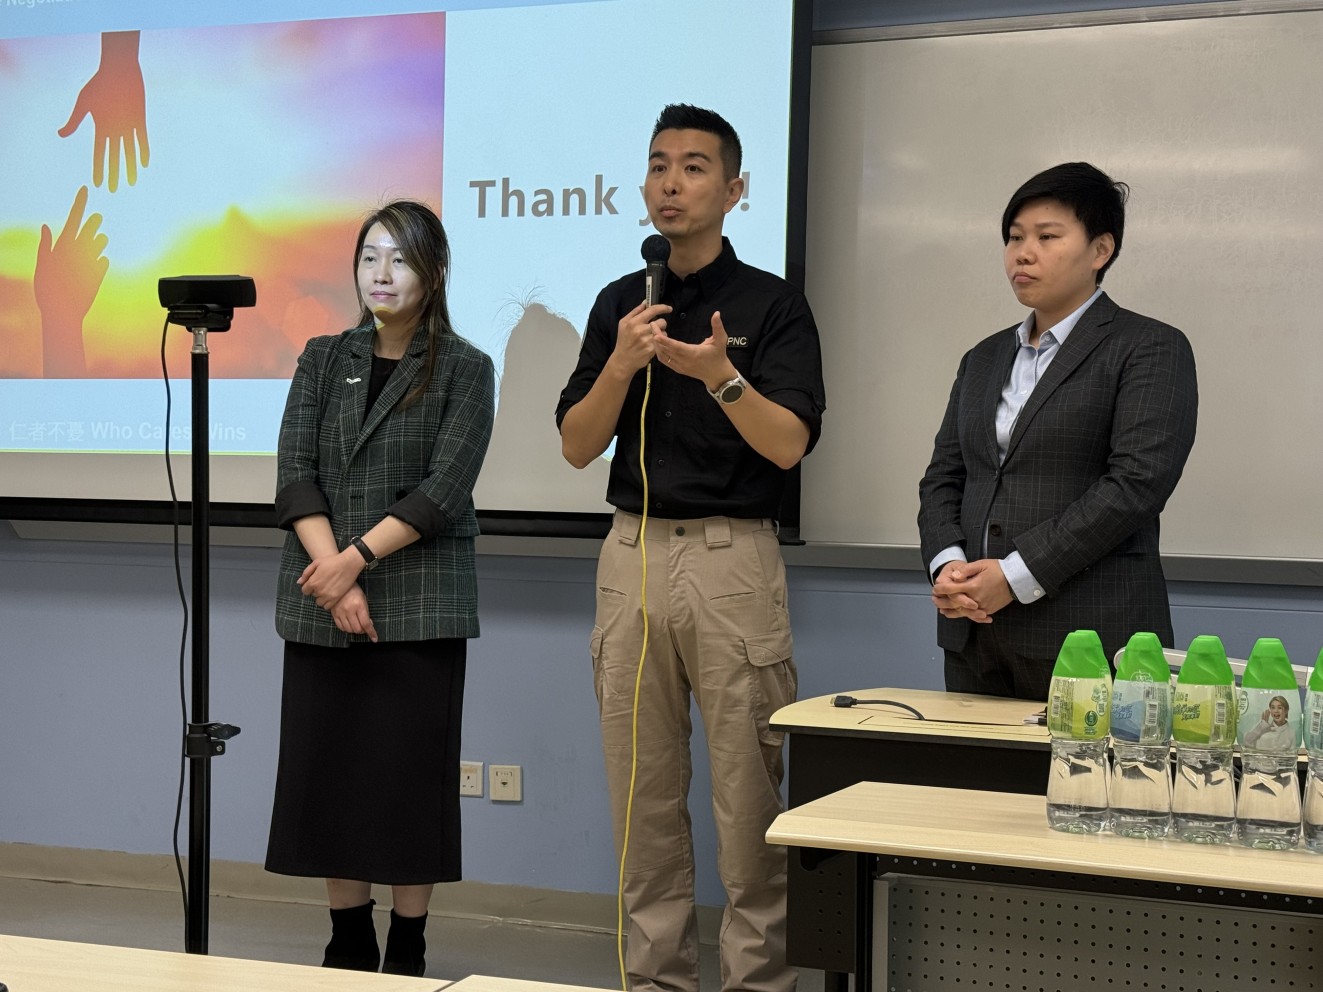 Lingnan University and the Tuen Mun District Police organise “Crisis Management on Campus” talk